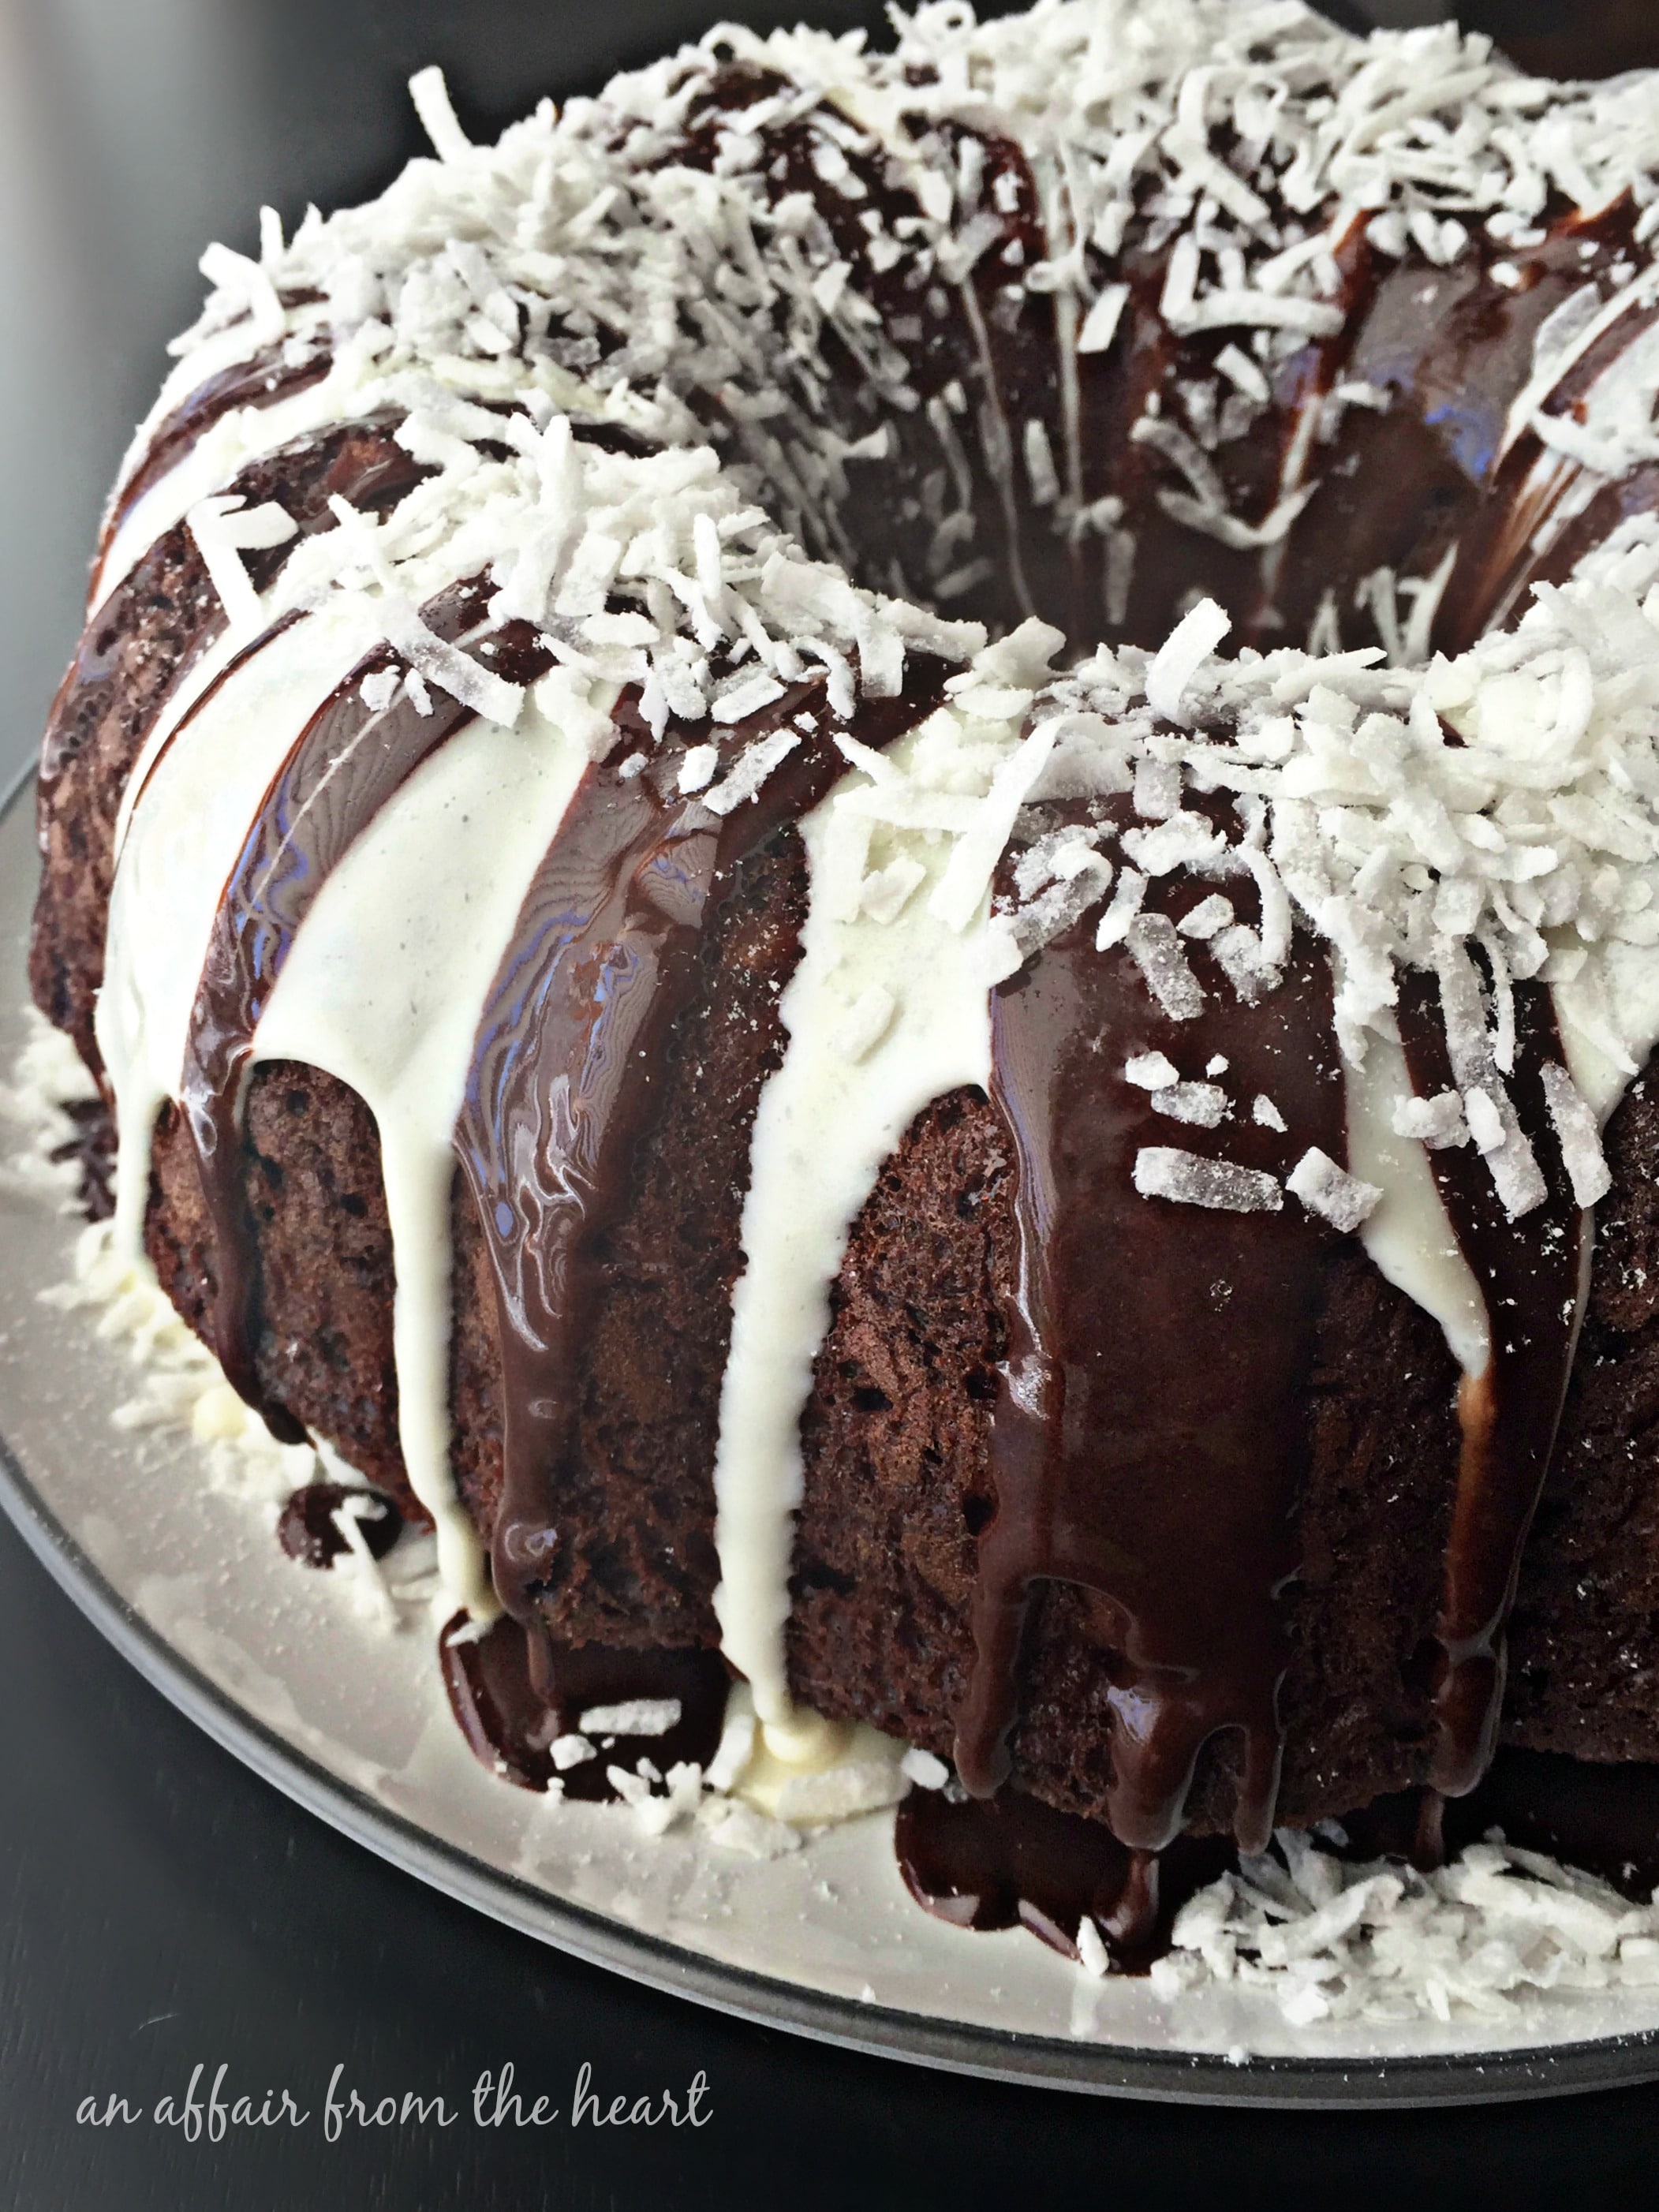 Chocolate Macaroon Tunnel Cake Just Like The Old Box Mix